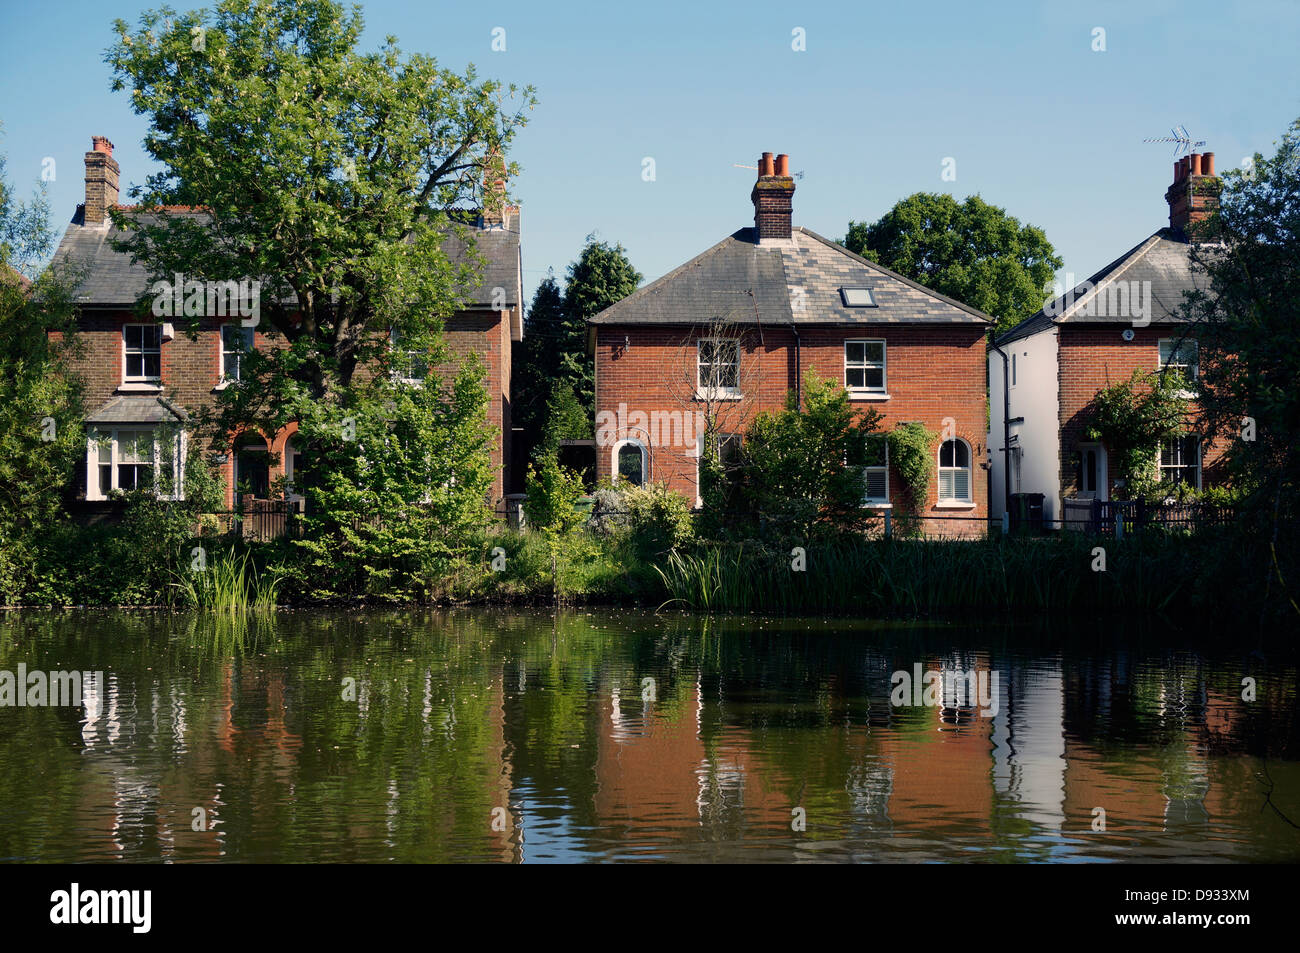 Period houses overlooking the village pond and reflecting in the water. Ashtead, Surrey, England, UK. Stock Photo